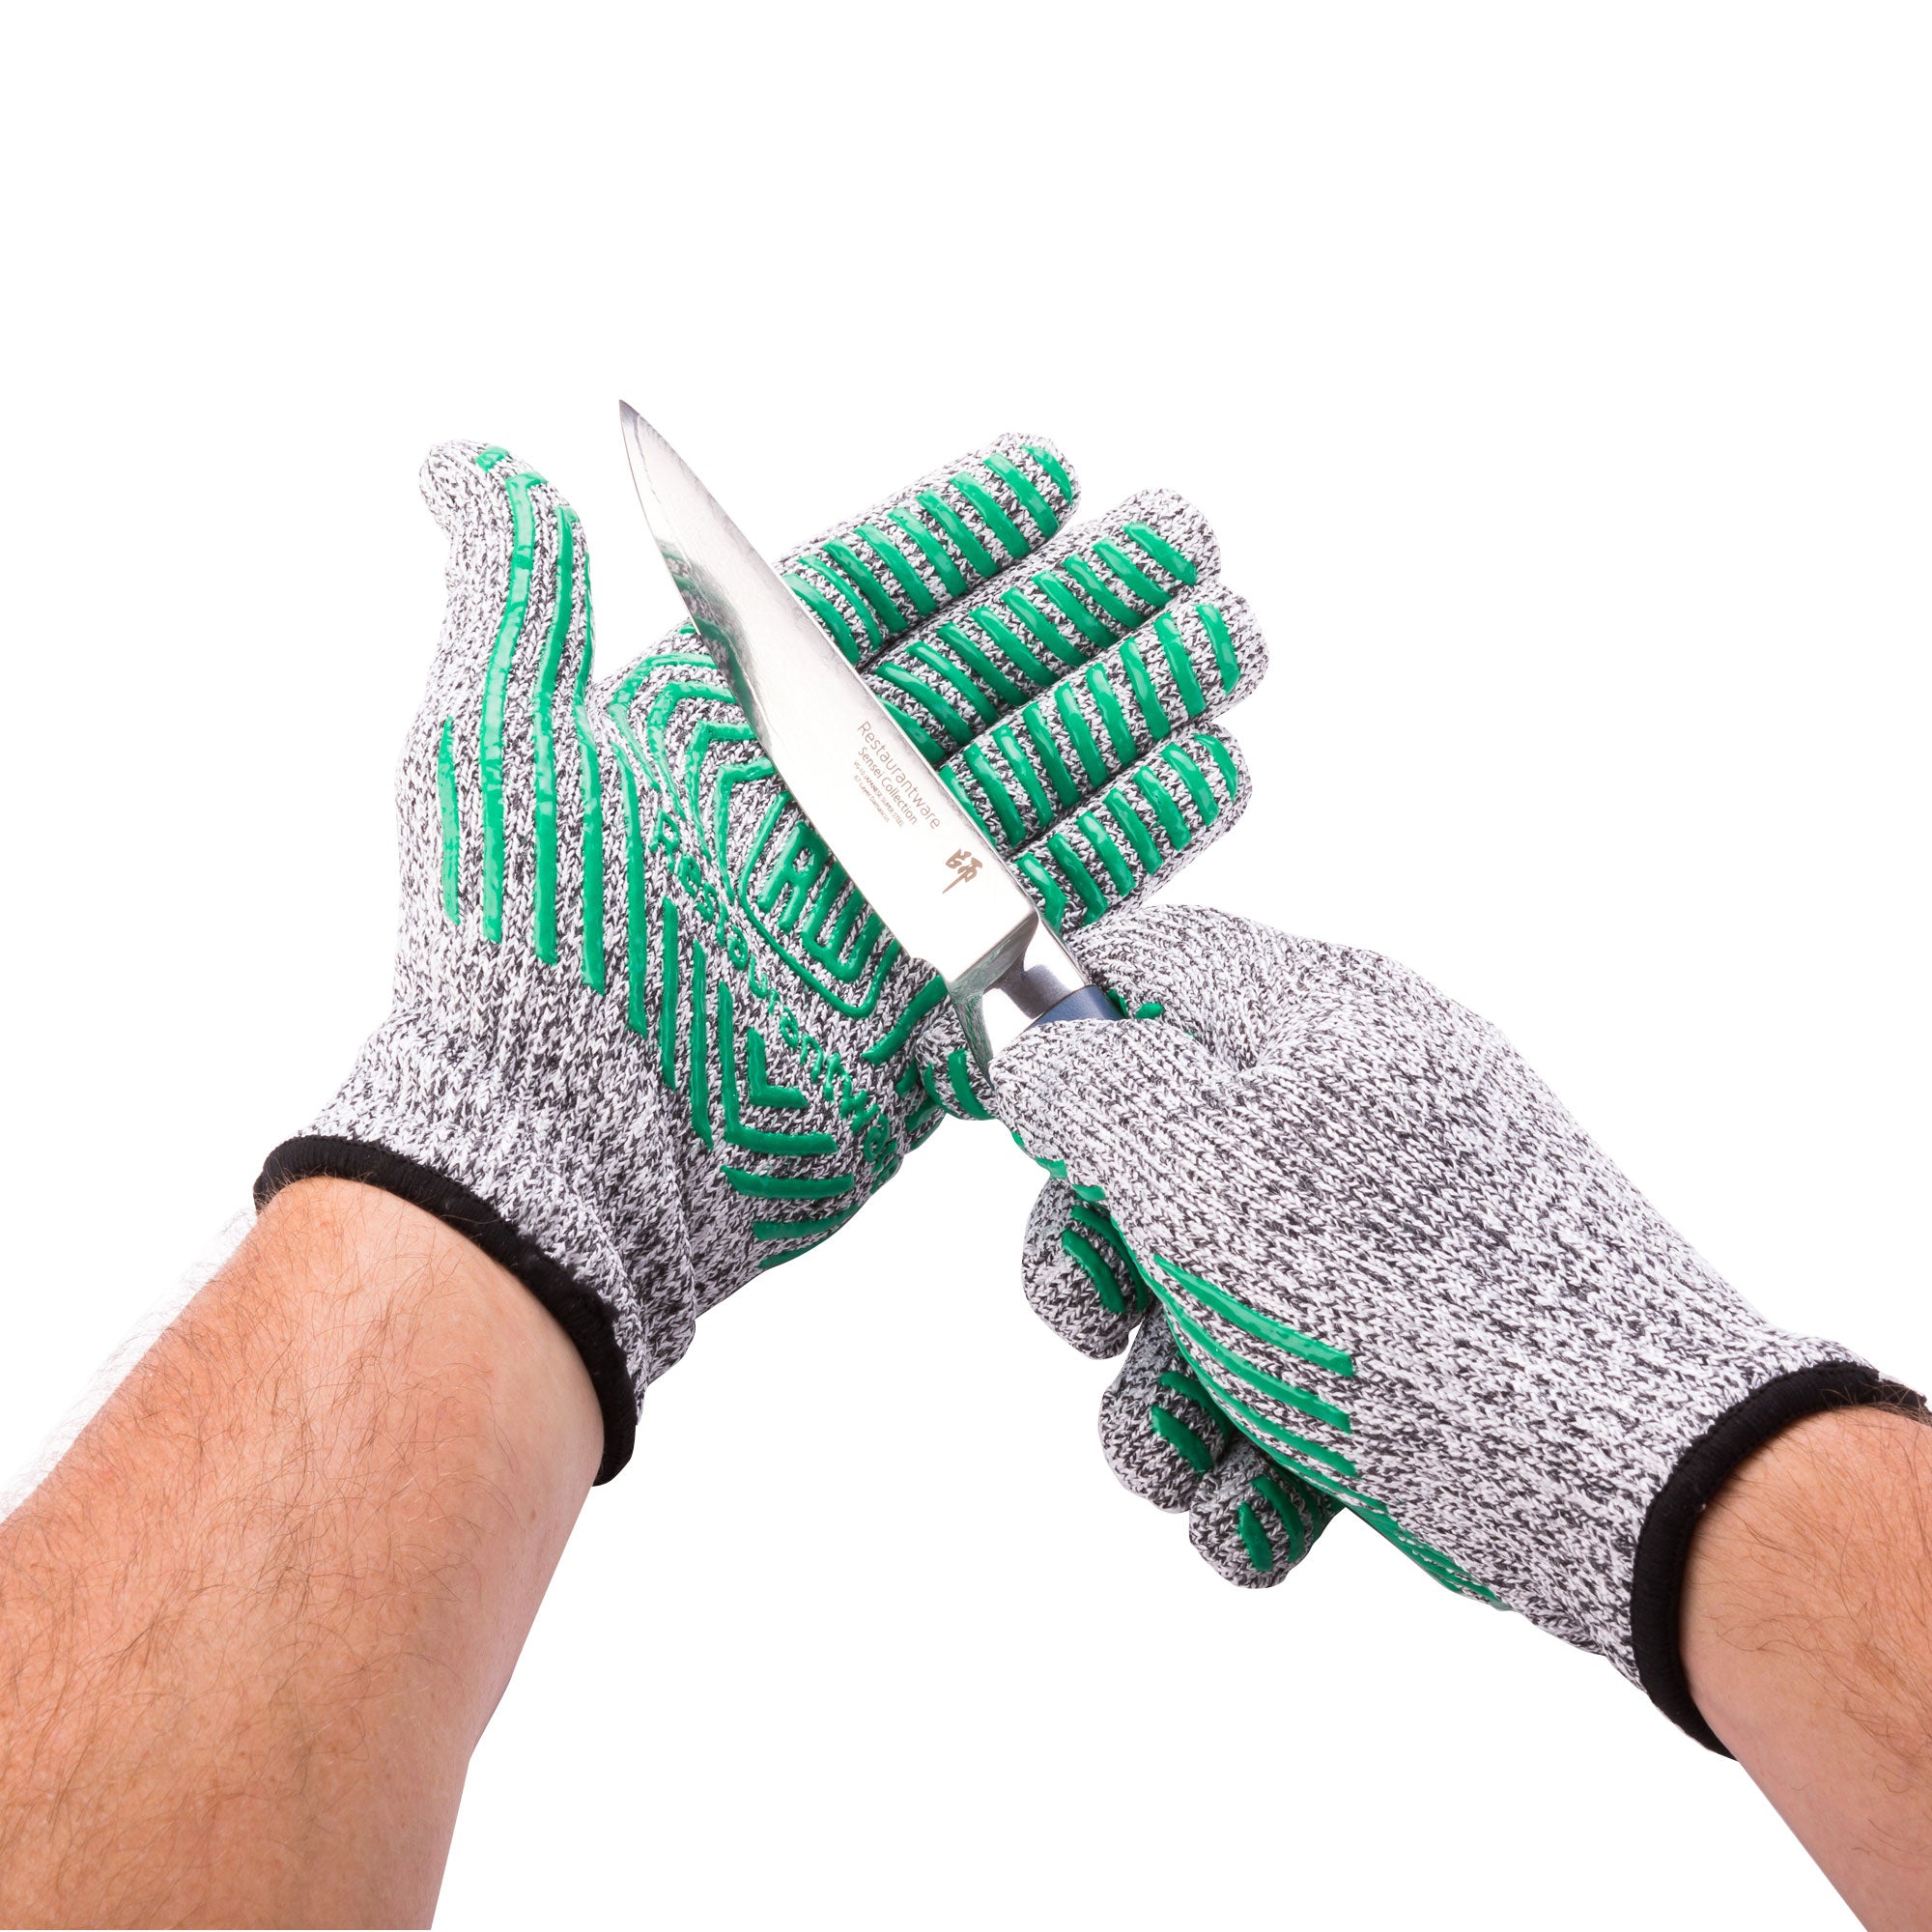 Gloves For Kitchen Cut Resistant Gloves PU coated. Food Grade Level 5  Safety for Cutting, Slicing Kitchen Accessories - 1 Pair